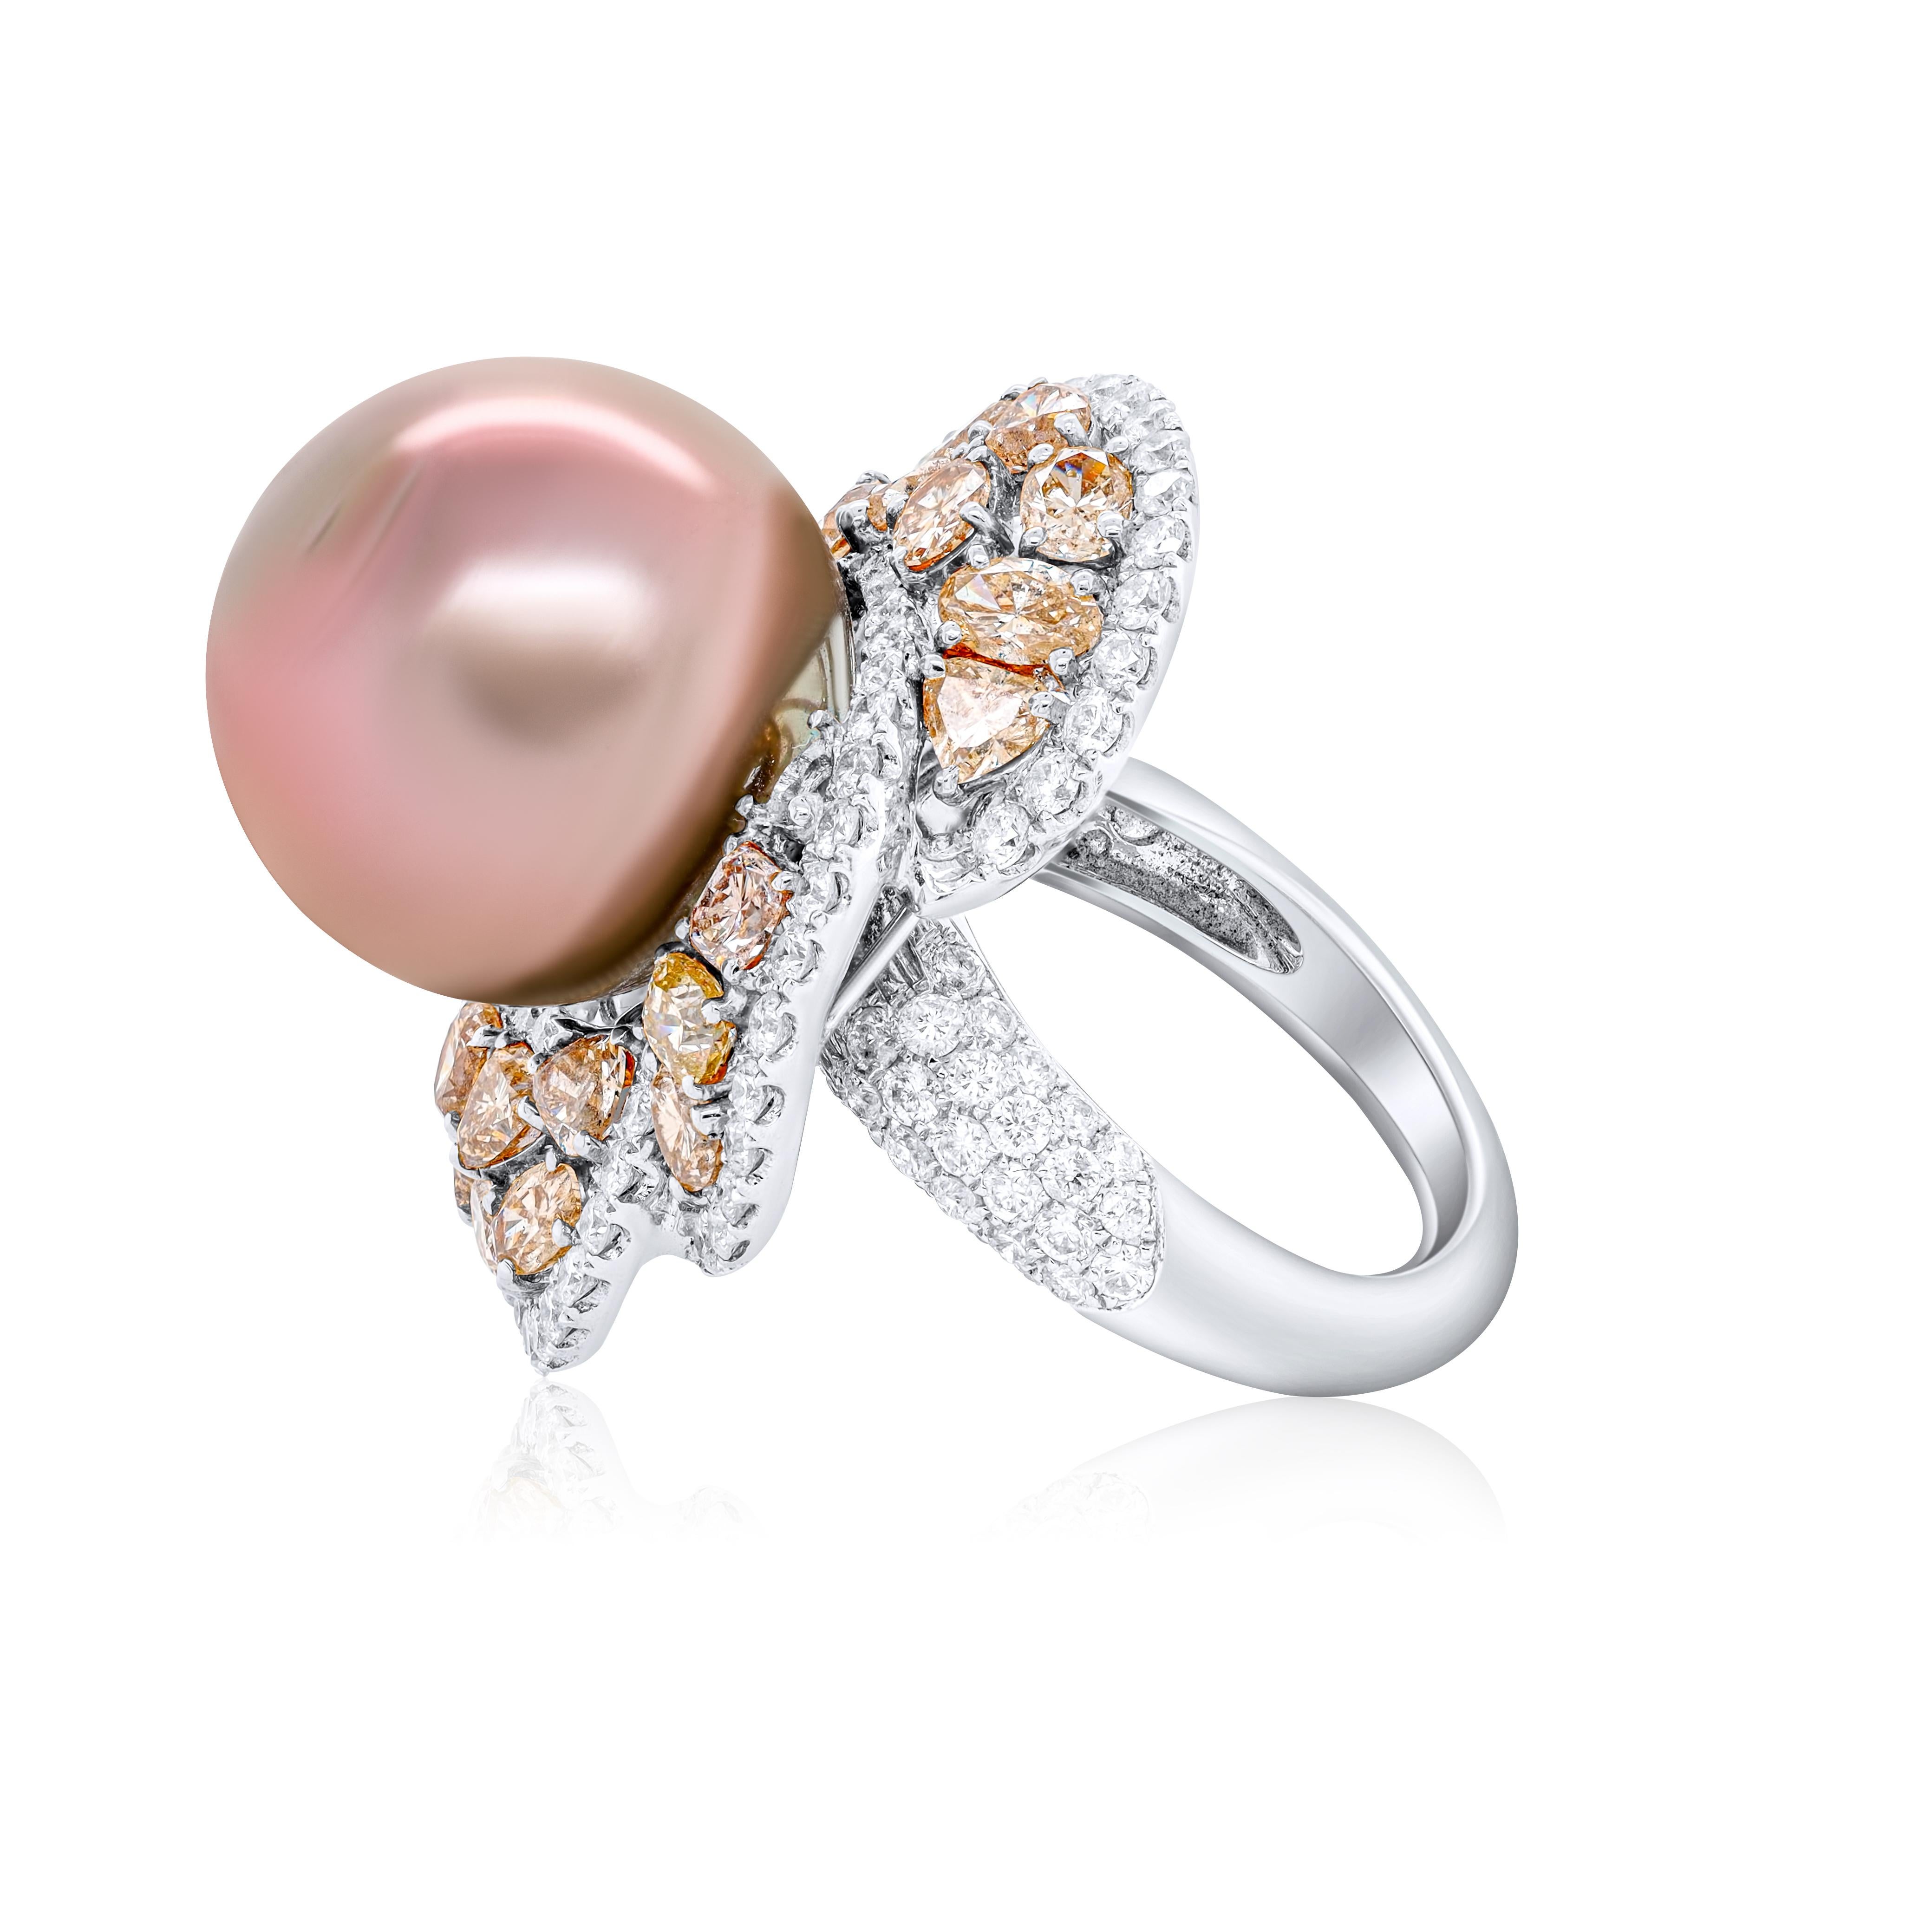 18 kt white gold pearl and diamond ring featuring a 16.00 mm pearl surrounded by 4.93 cts tw of pink and white diamonds in a flower design
Diana M. is a leading supplier of top-quality fine jewelry for over 35 years.
Diana M is one-stop shop for all